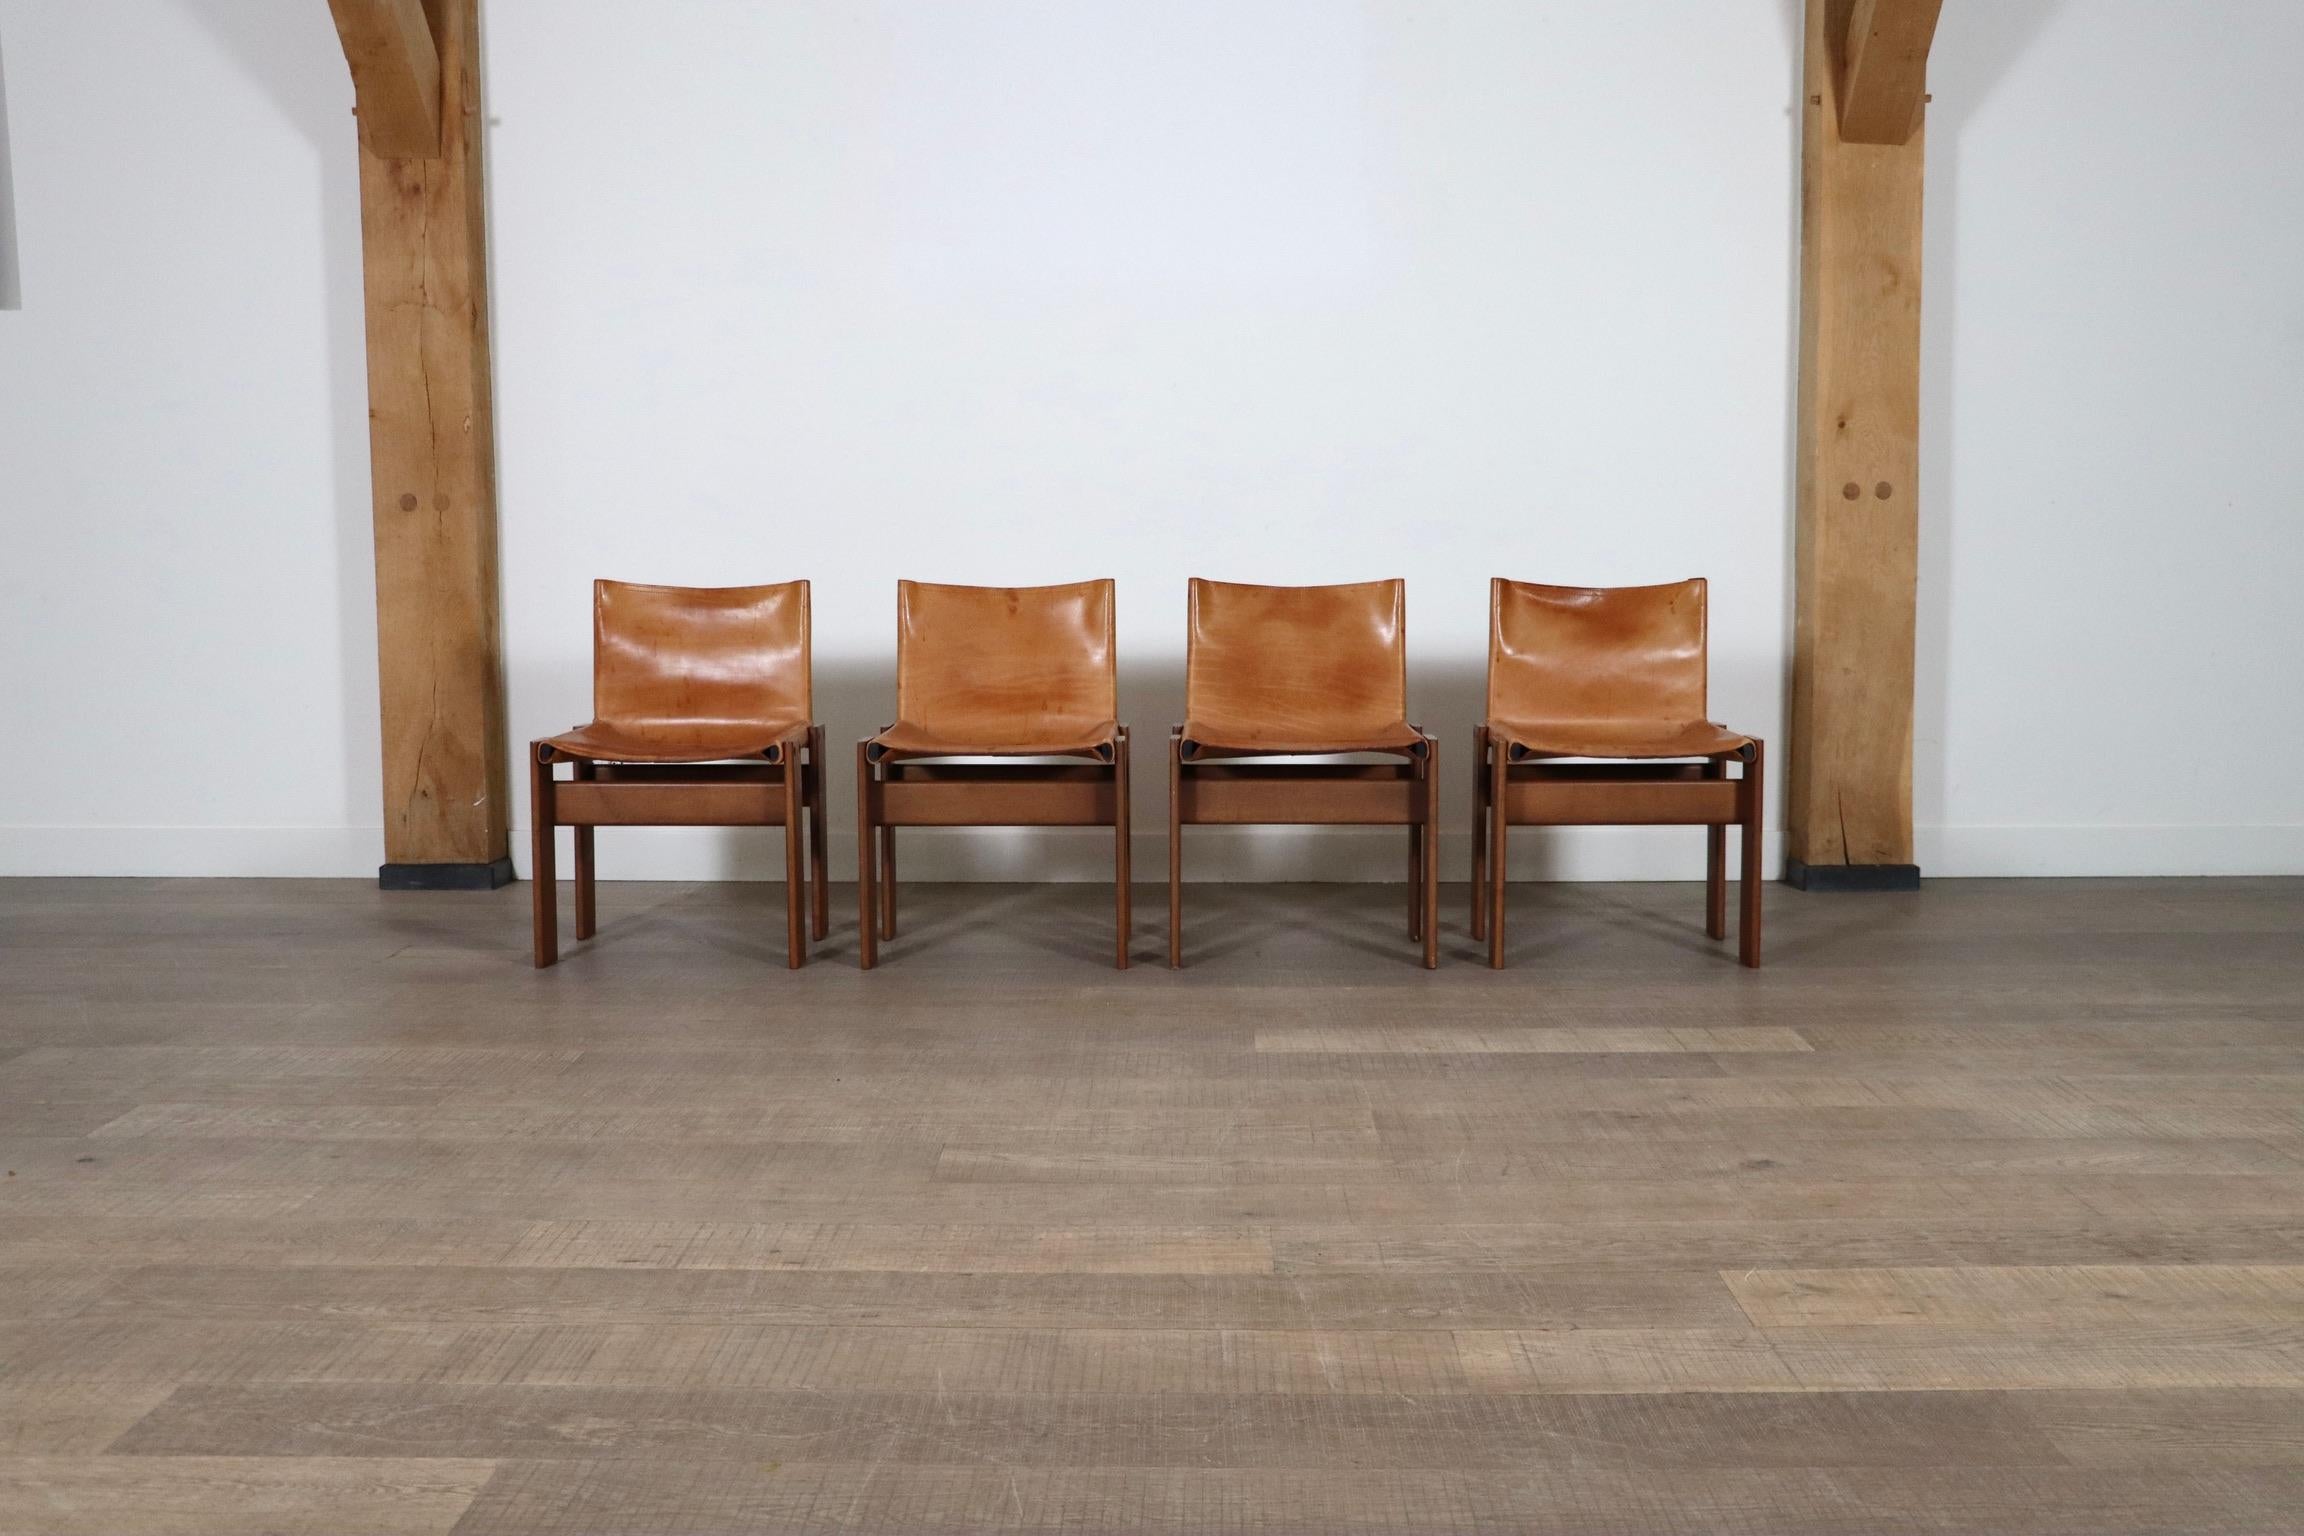 Fantastic set of 4 ‘Monk’ chairs designed by Afra and Tobia Scarpa for Molteni, Italy 1974. The sober design, after its name “Monk” is complemented with this beautiful combination of the patinated natural leather and walnut frame. When de­signing